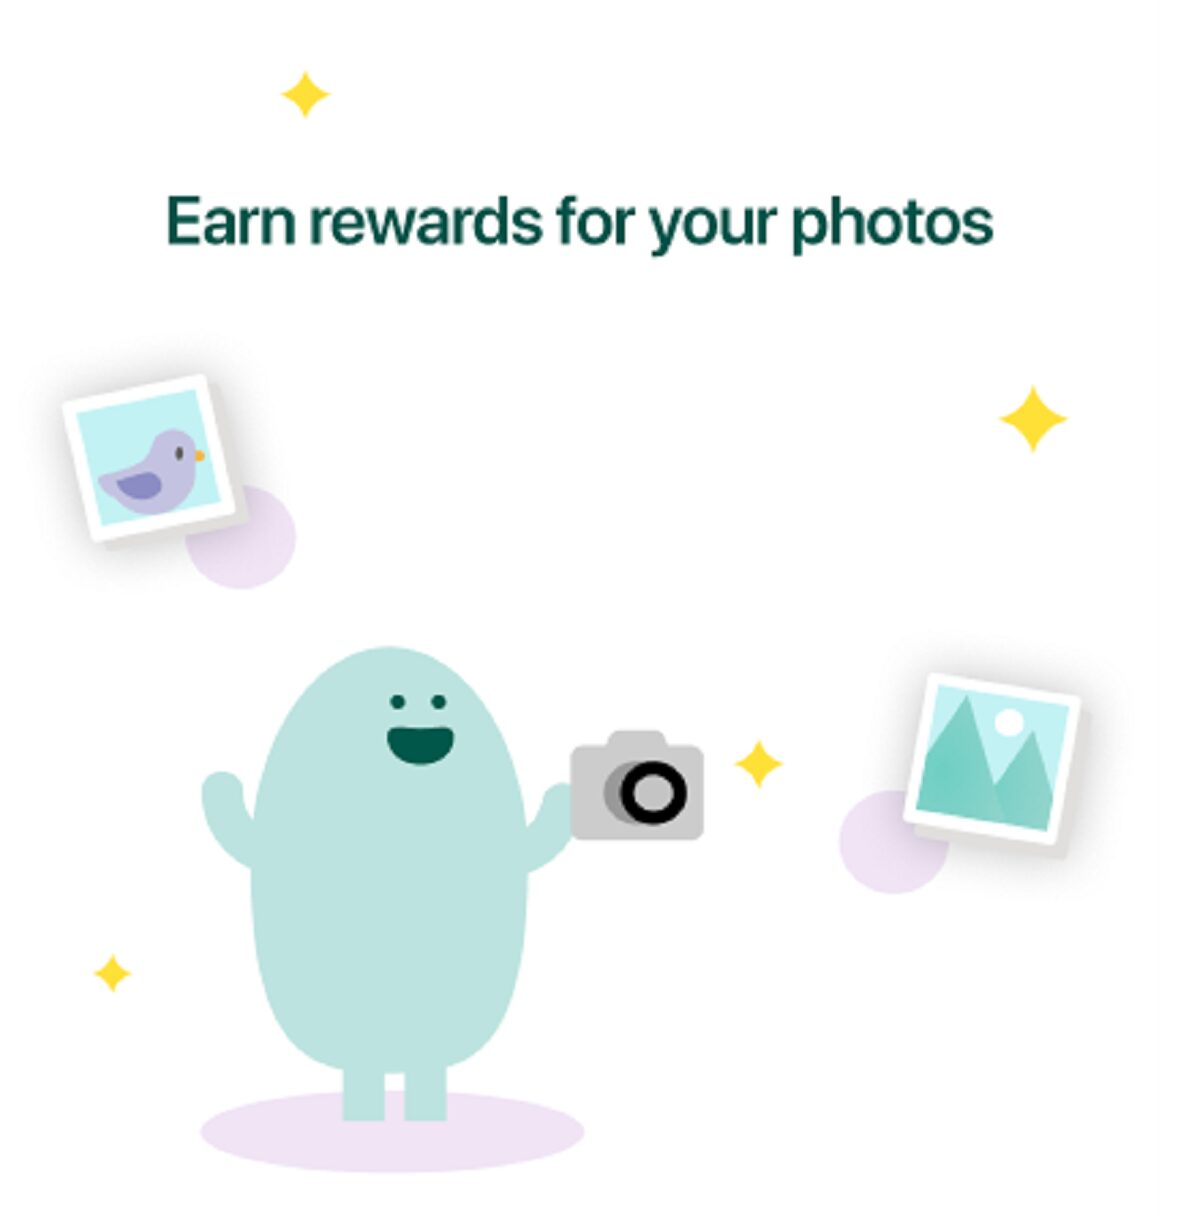 Microsoft’s new Trove app is designed to help you get paid for your pictures